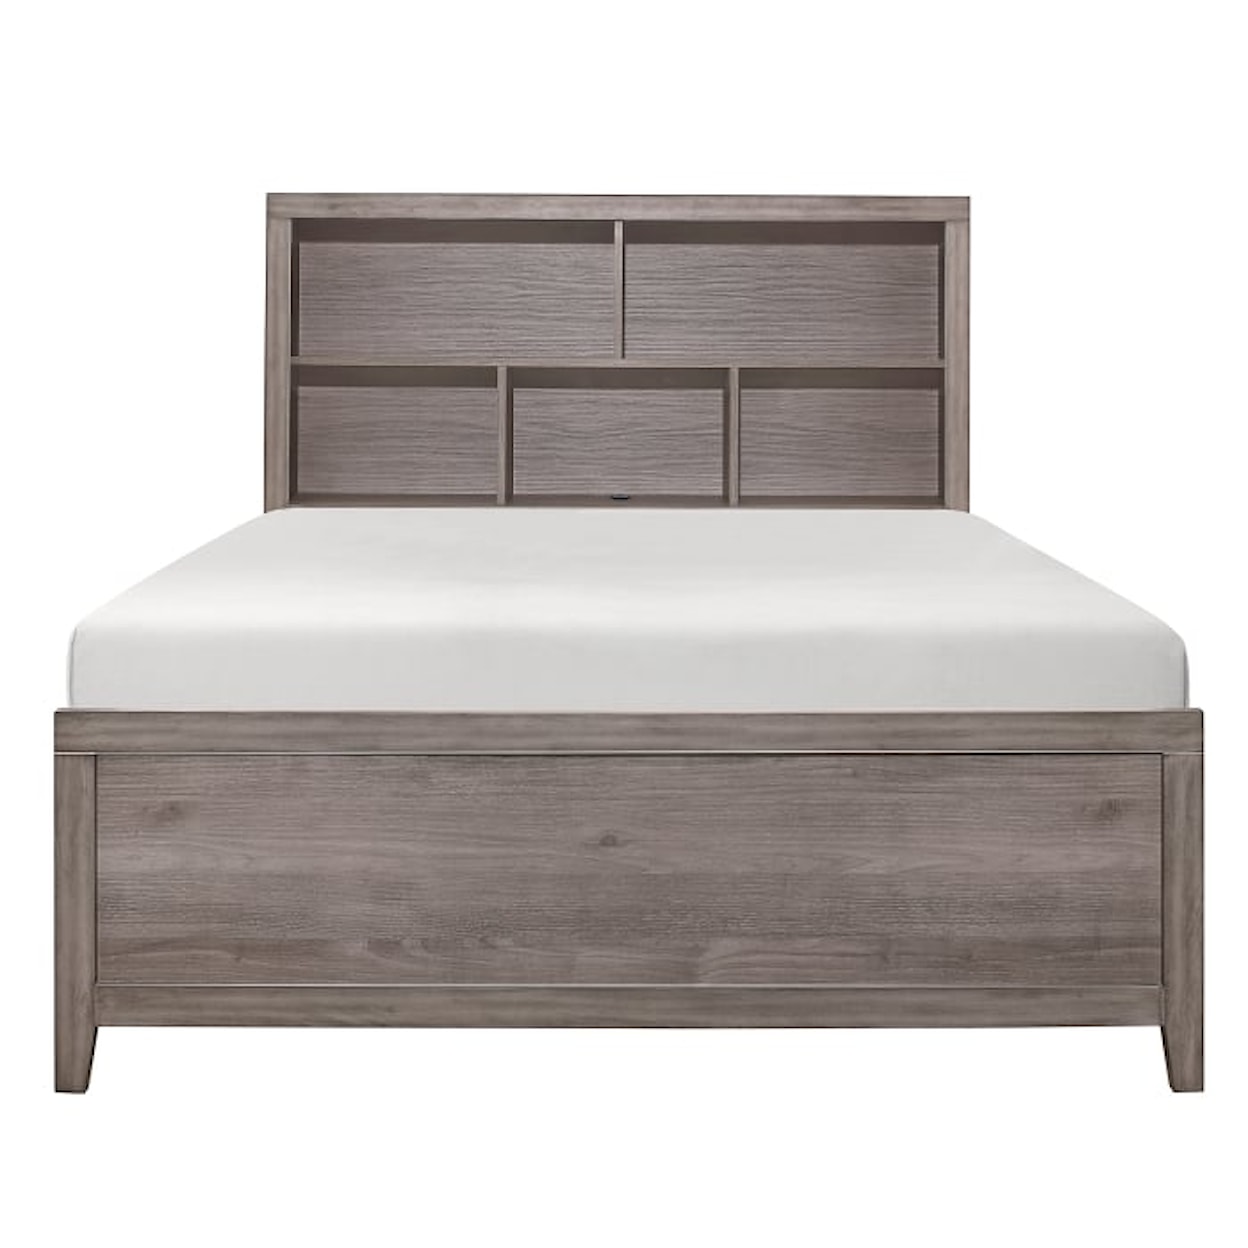 Homelegance Woodrow 3- Piece Full Wall Bed